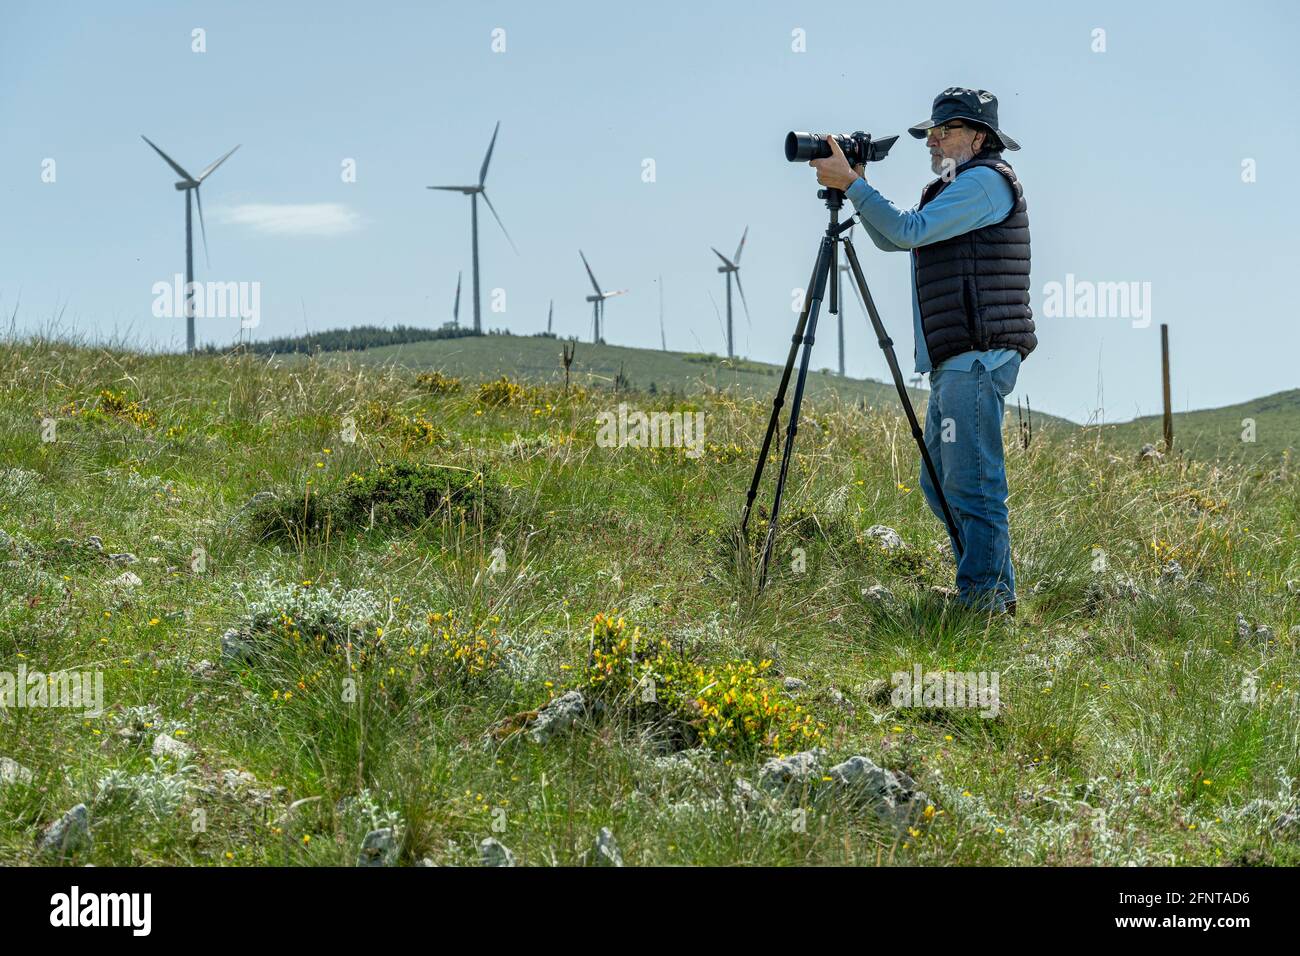 Elderly man using new technology. Camera on tripod, casual dressed man. Wind turbines in the background. Abruzzo, Italy, Europe Stock Photo